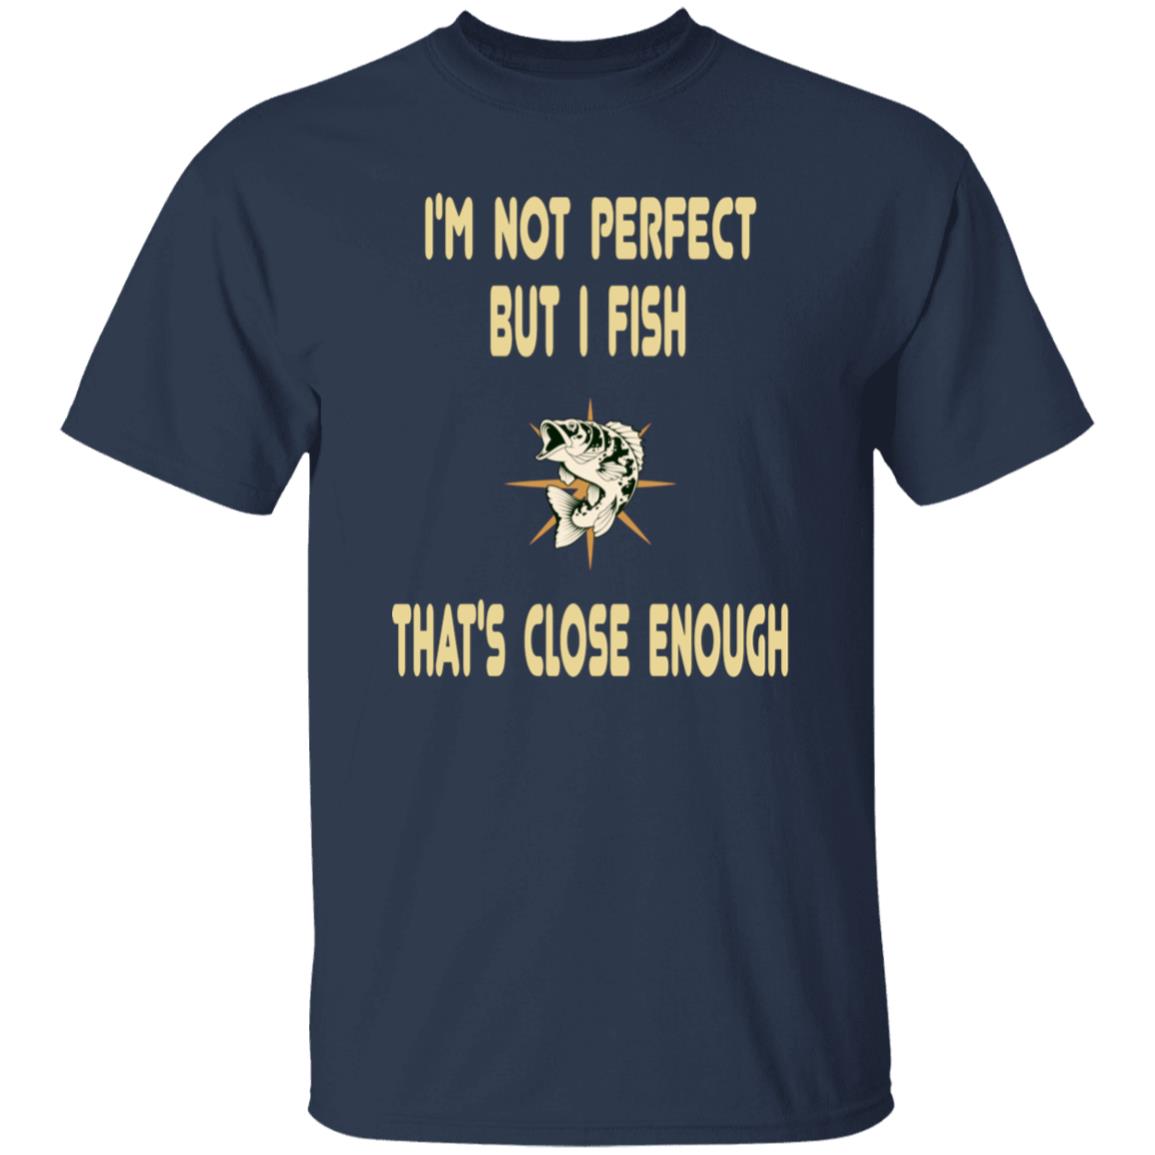 I'm not perfect but I fish that's close enough t-shirt navy